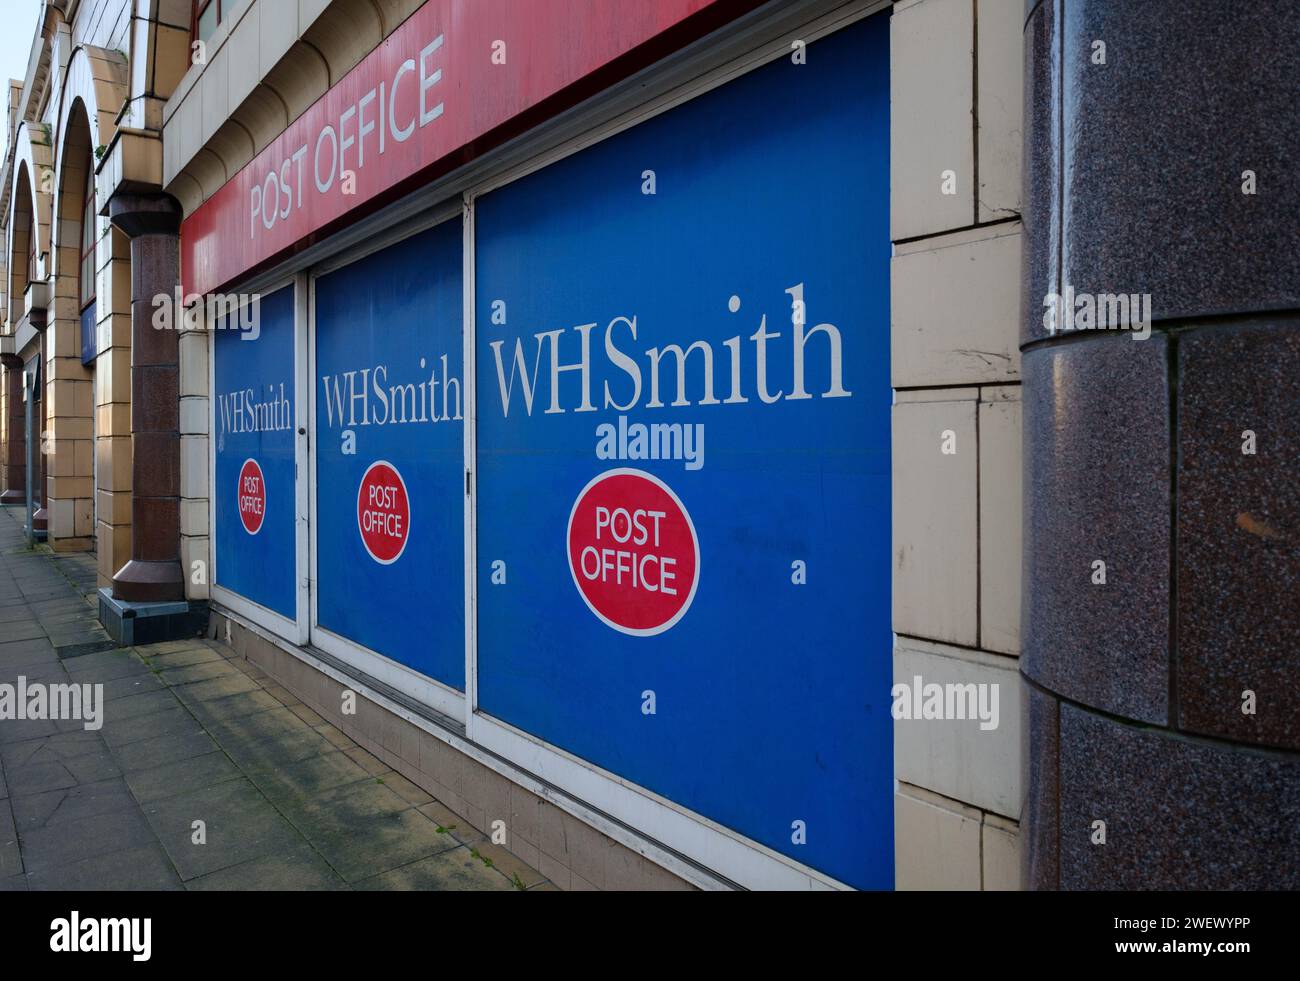 Shop Window of WHsmith in Redhill Surrey covered with the logo of the Post Office and WHsmith. Stock Photo